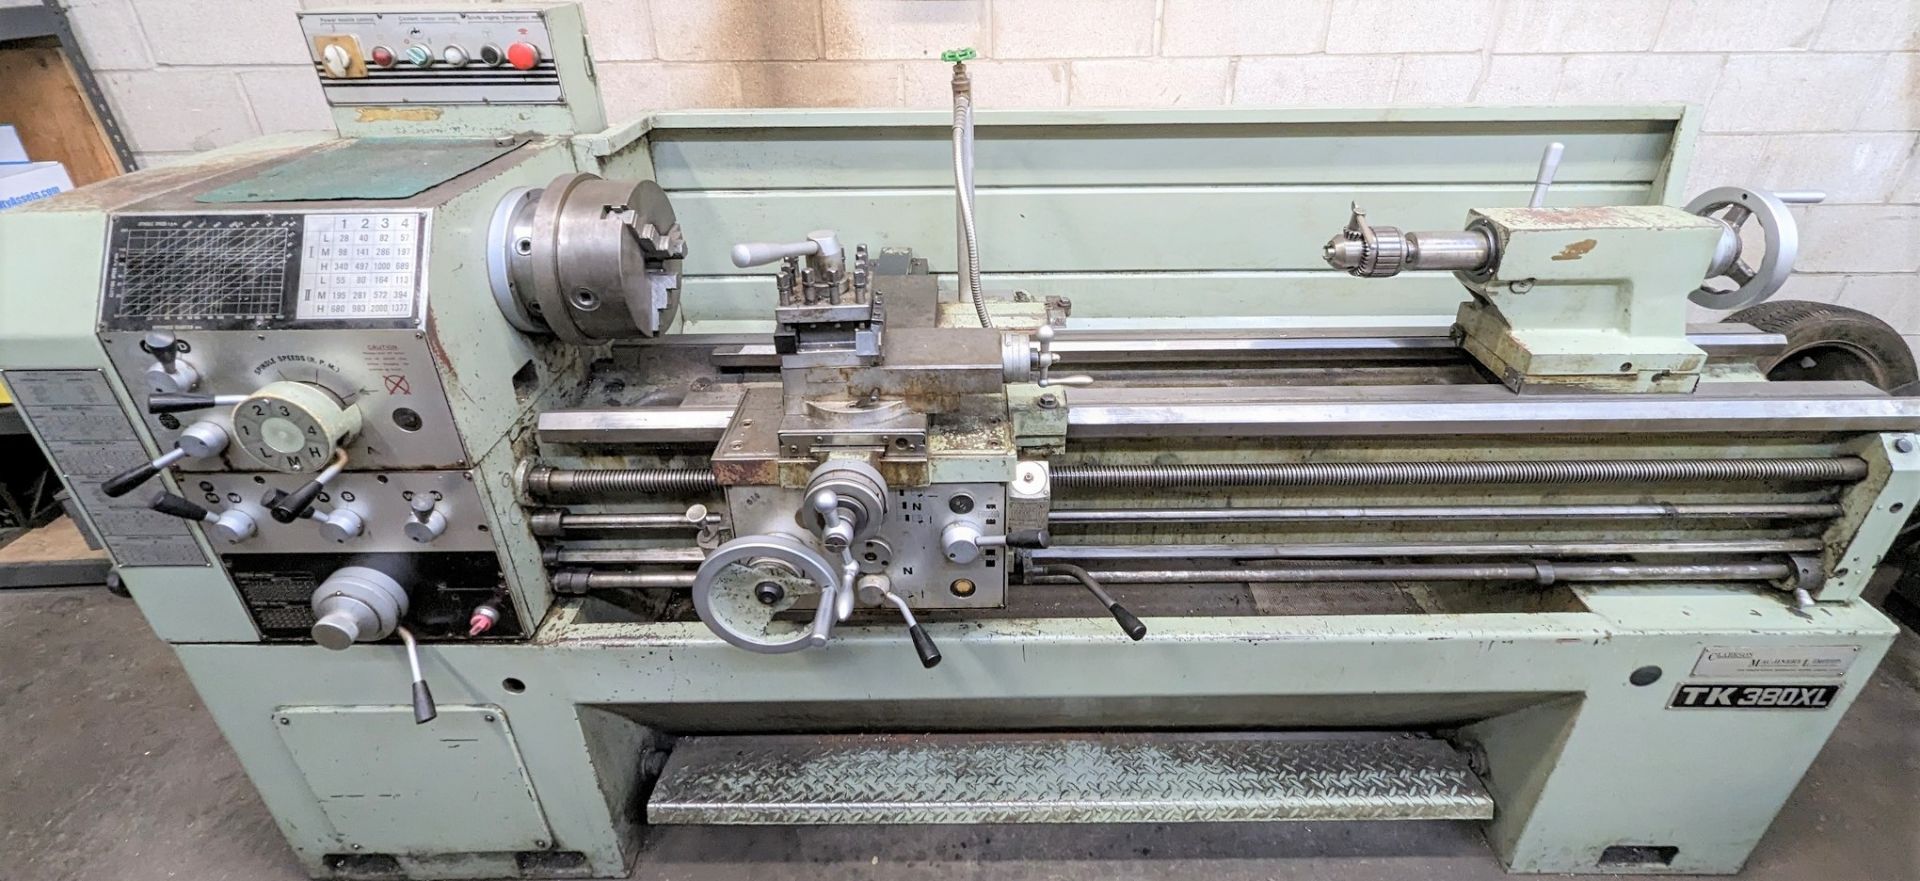 TAKANG TK 380XL ENGINE LATHE, 9” 3-JAW CHUCK, 18” SWING, 72” BED, 2.25” BORE, TAILSTOCK, TOOL